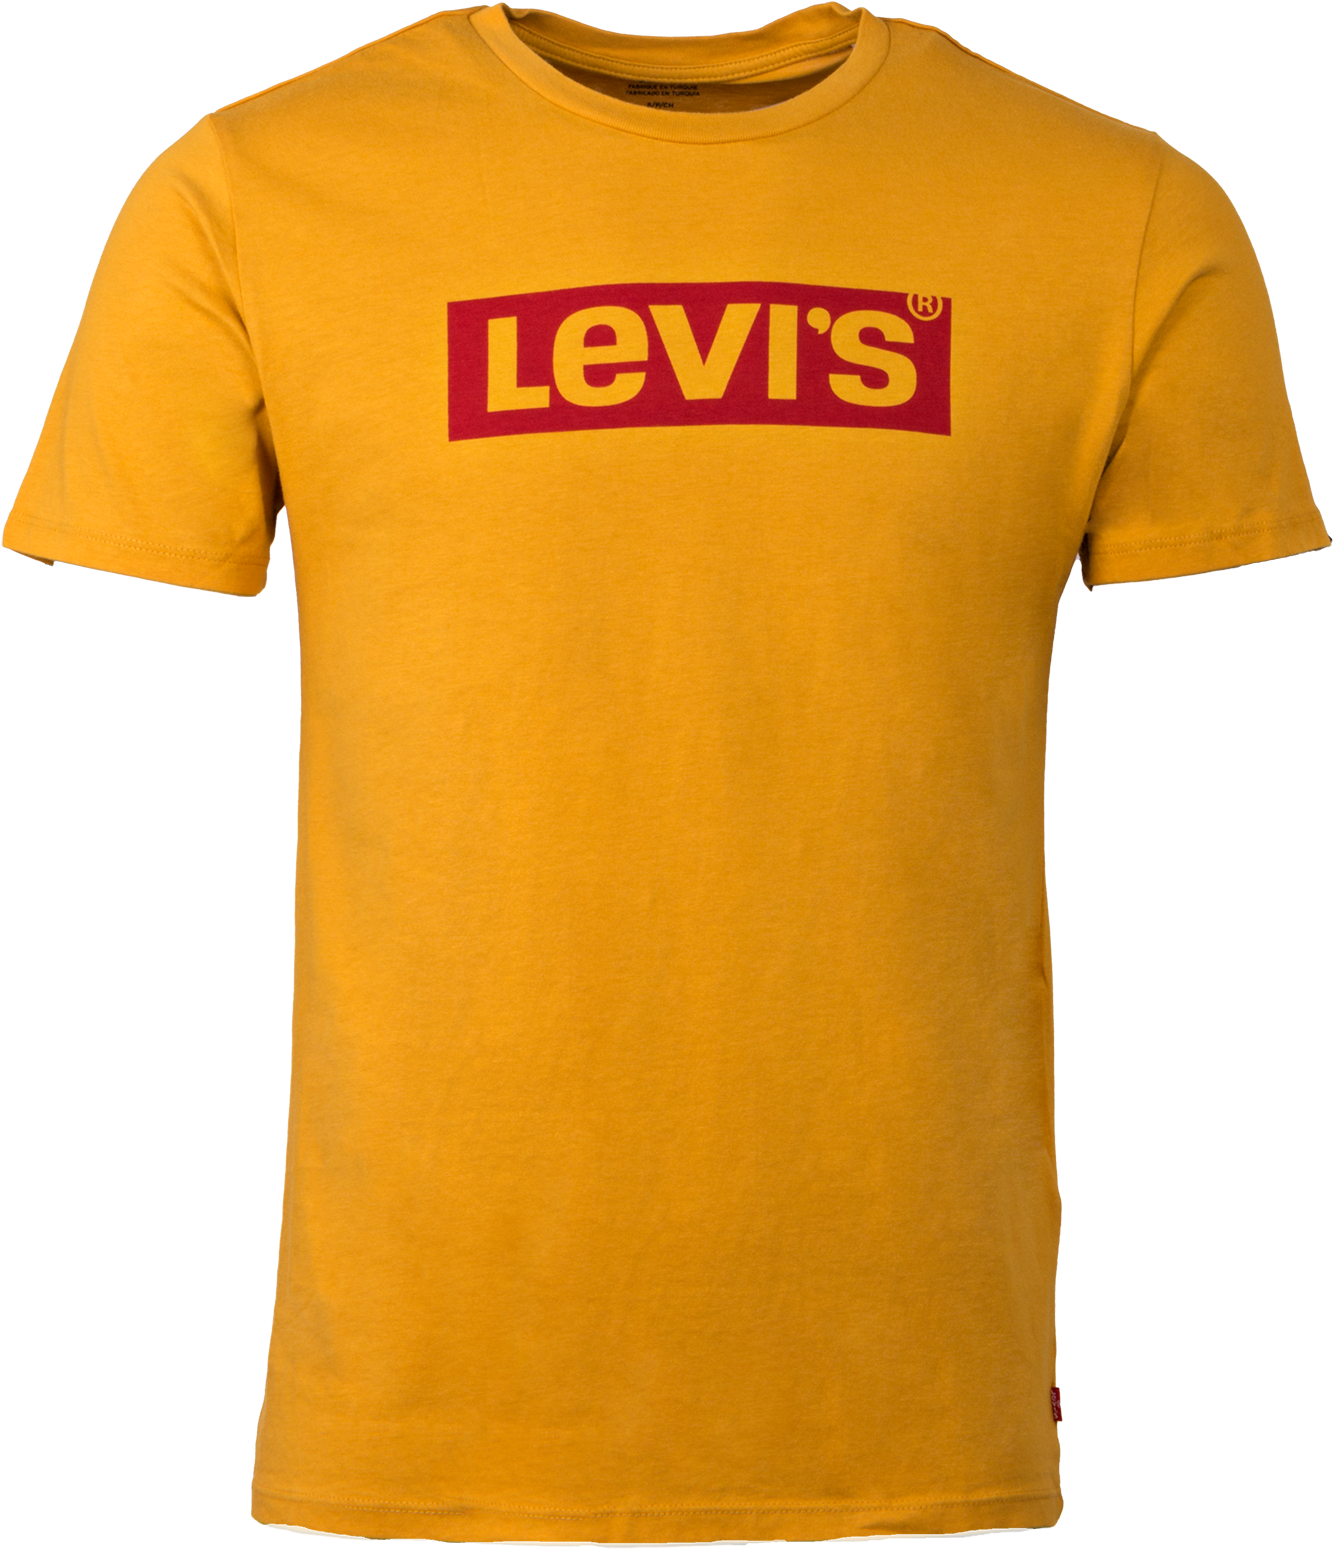 A Yellow Shirt With A Logo On It